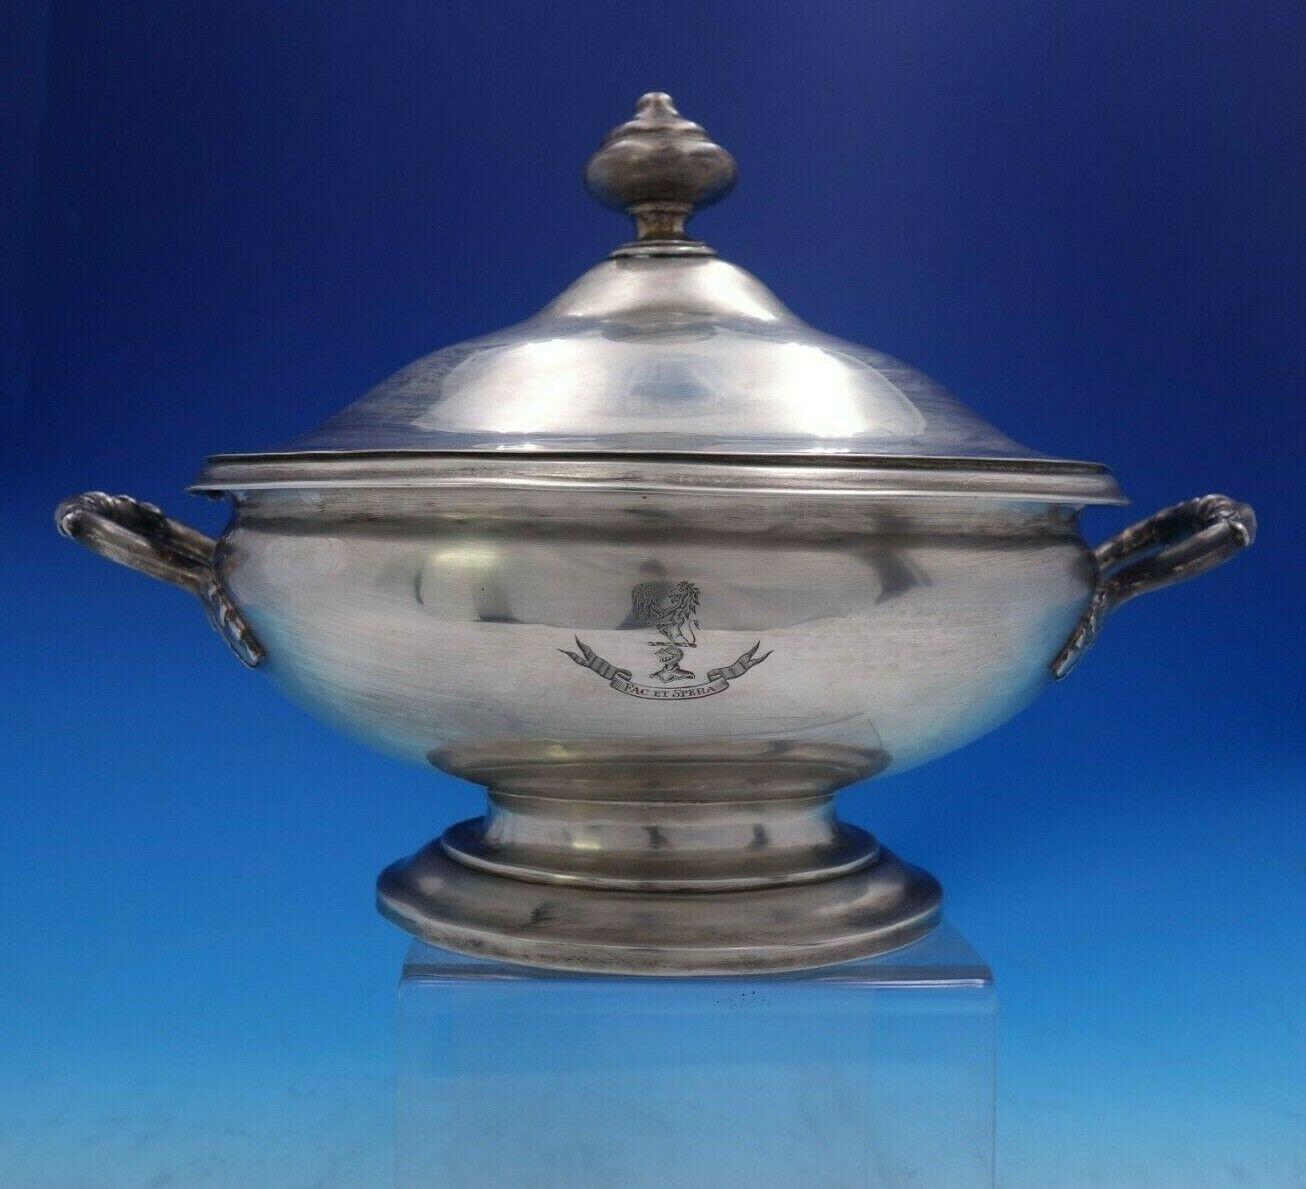 Chartier

Outstanding English Georgian sterling silver handwrought covered vegetable bowl with pedestal base and applied handles made in London in 1702. This piece has measures: 8